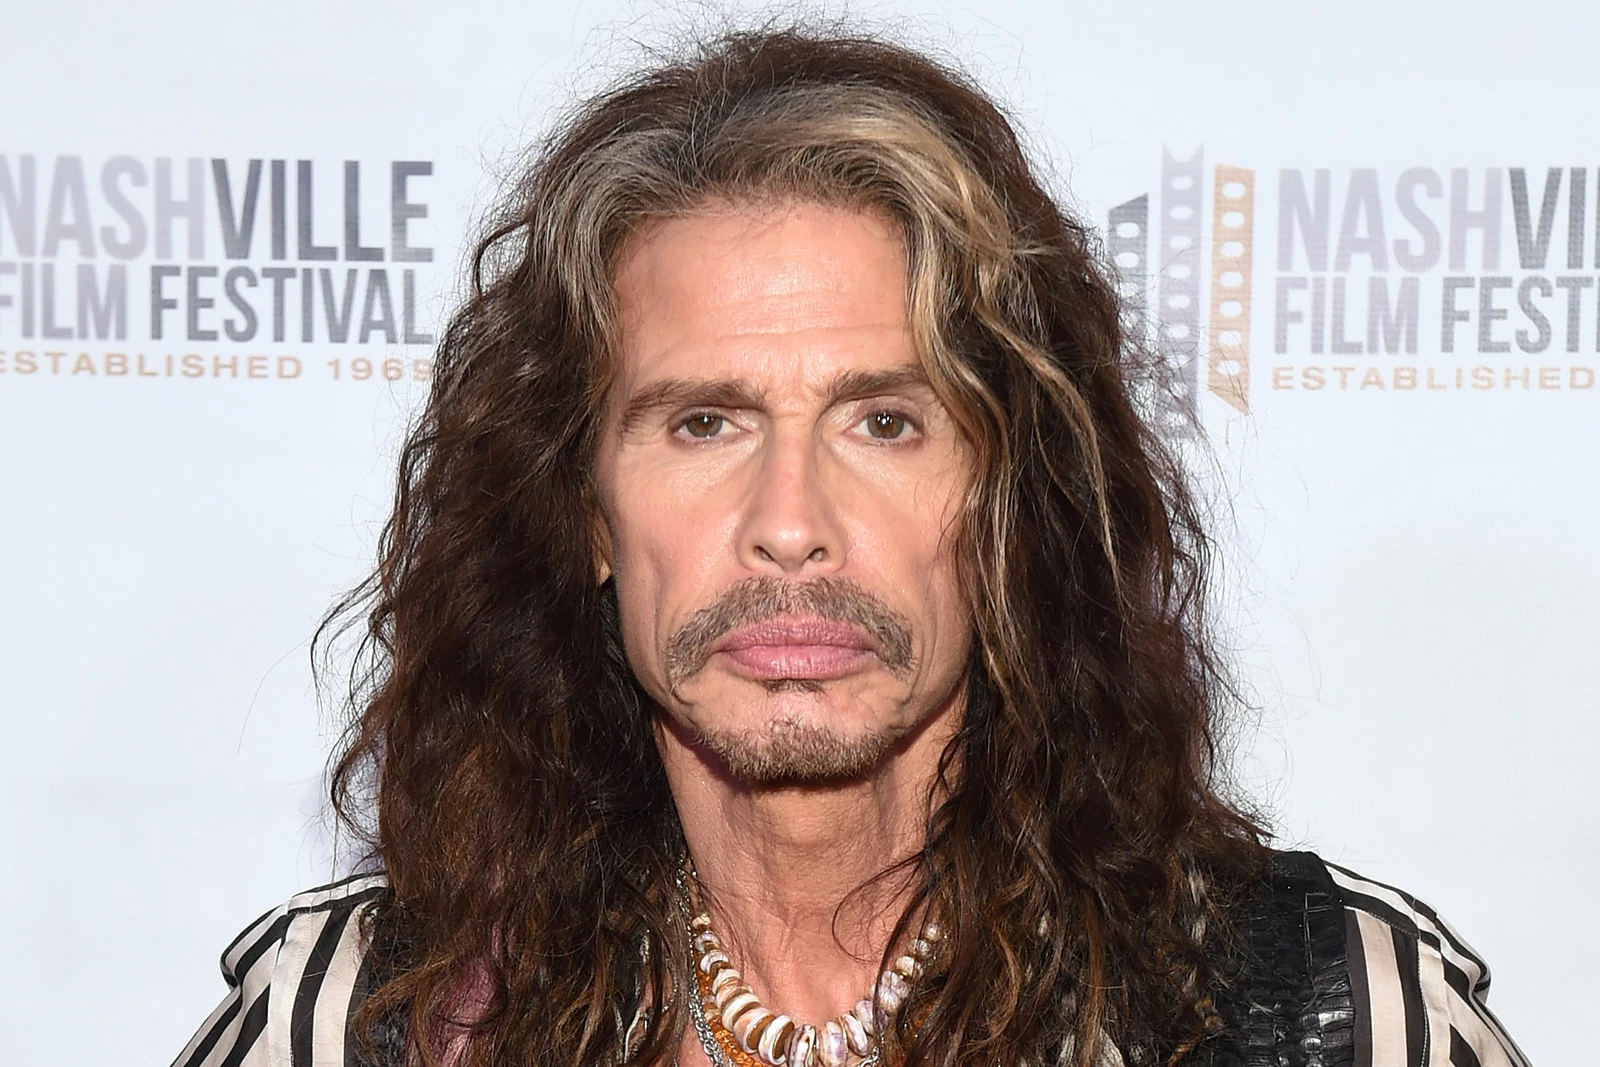 Steven Tyler Linked To Sexual Assault Of A Minor Lawsuit Drgnews